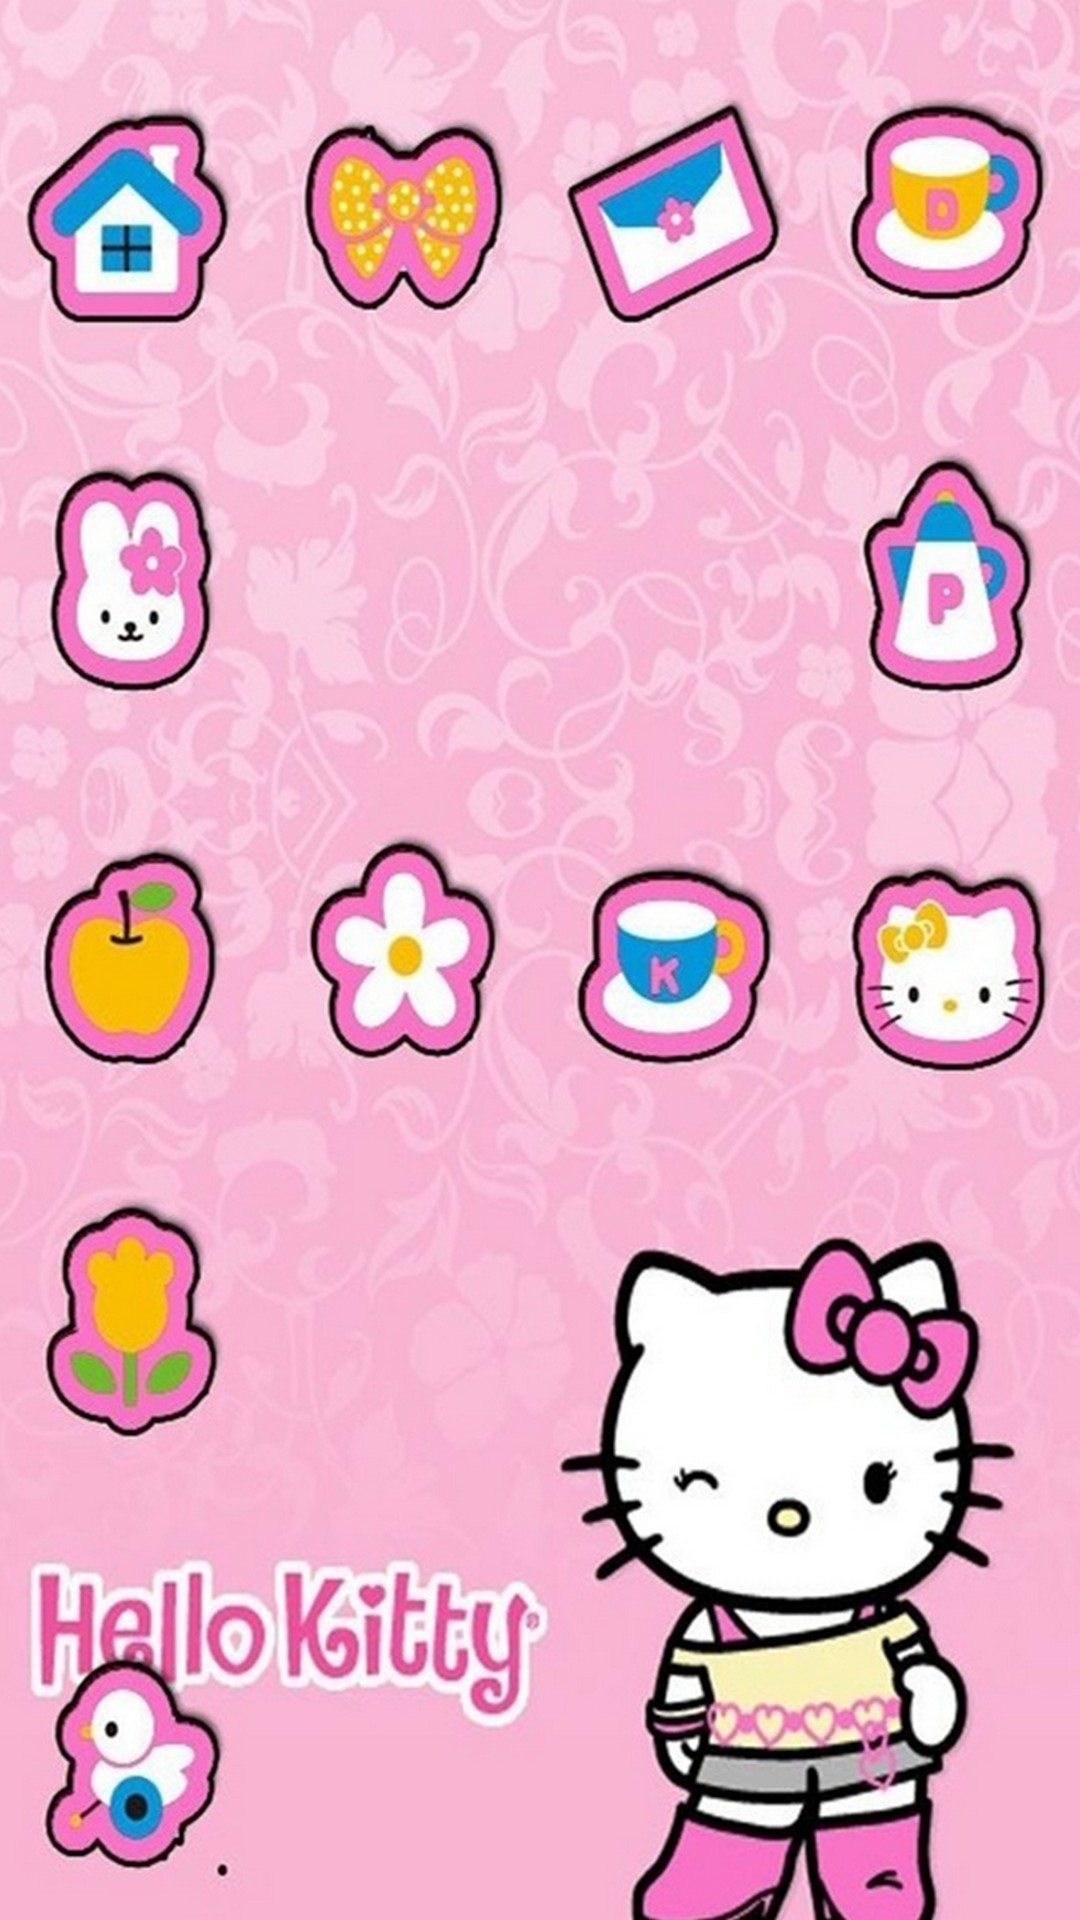 Android Wallpaper HD Hello Kitty with image resolution 1080x1920 pixel. You can make this wallpaper for your Android backgrounds, Tablet, Smartphones Screensavers and Mobile Phone Lock Screen